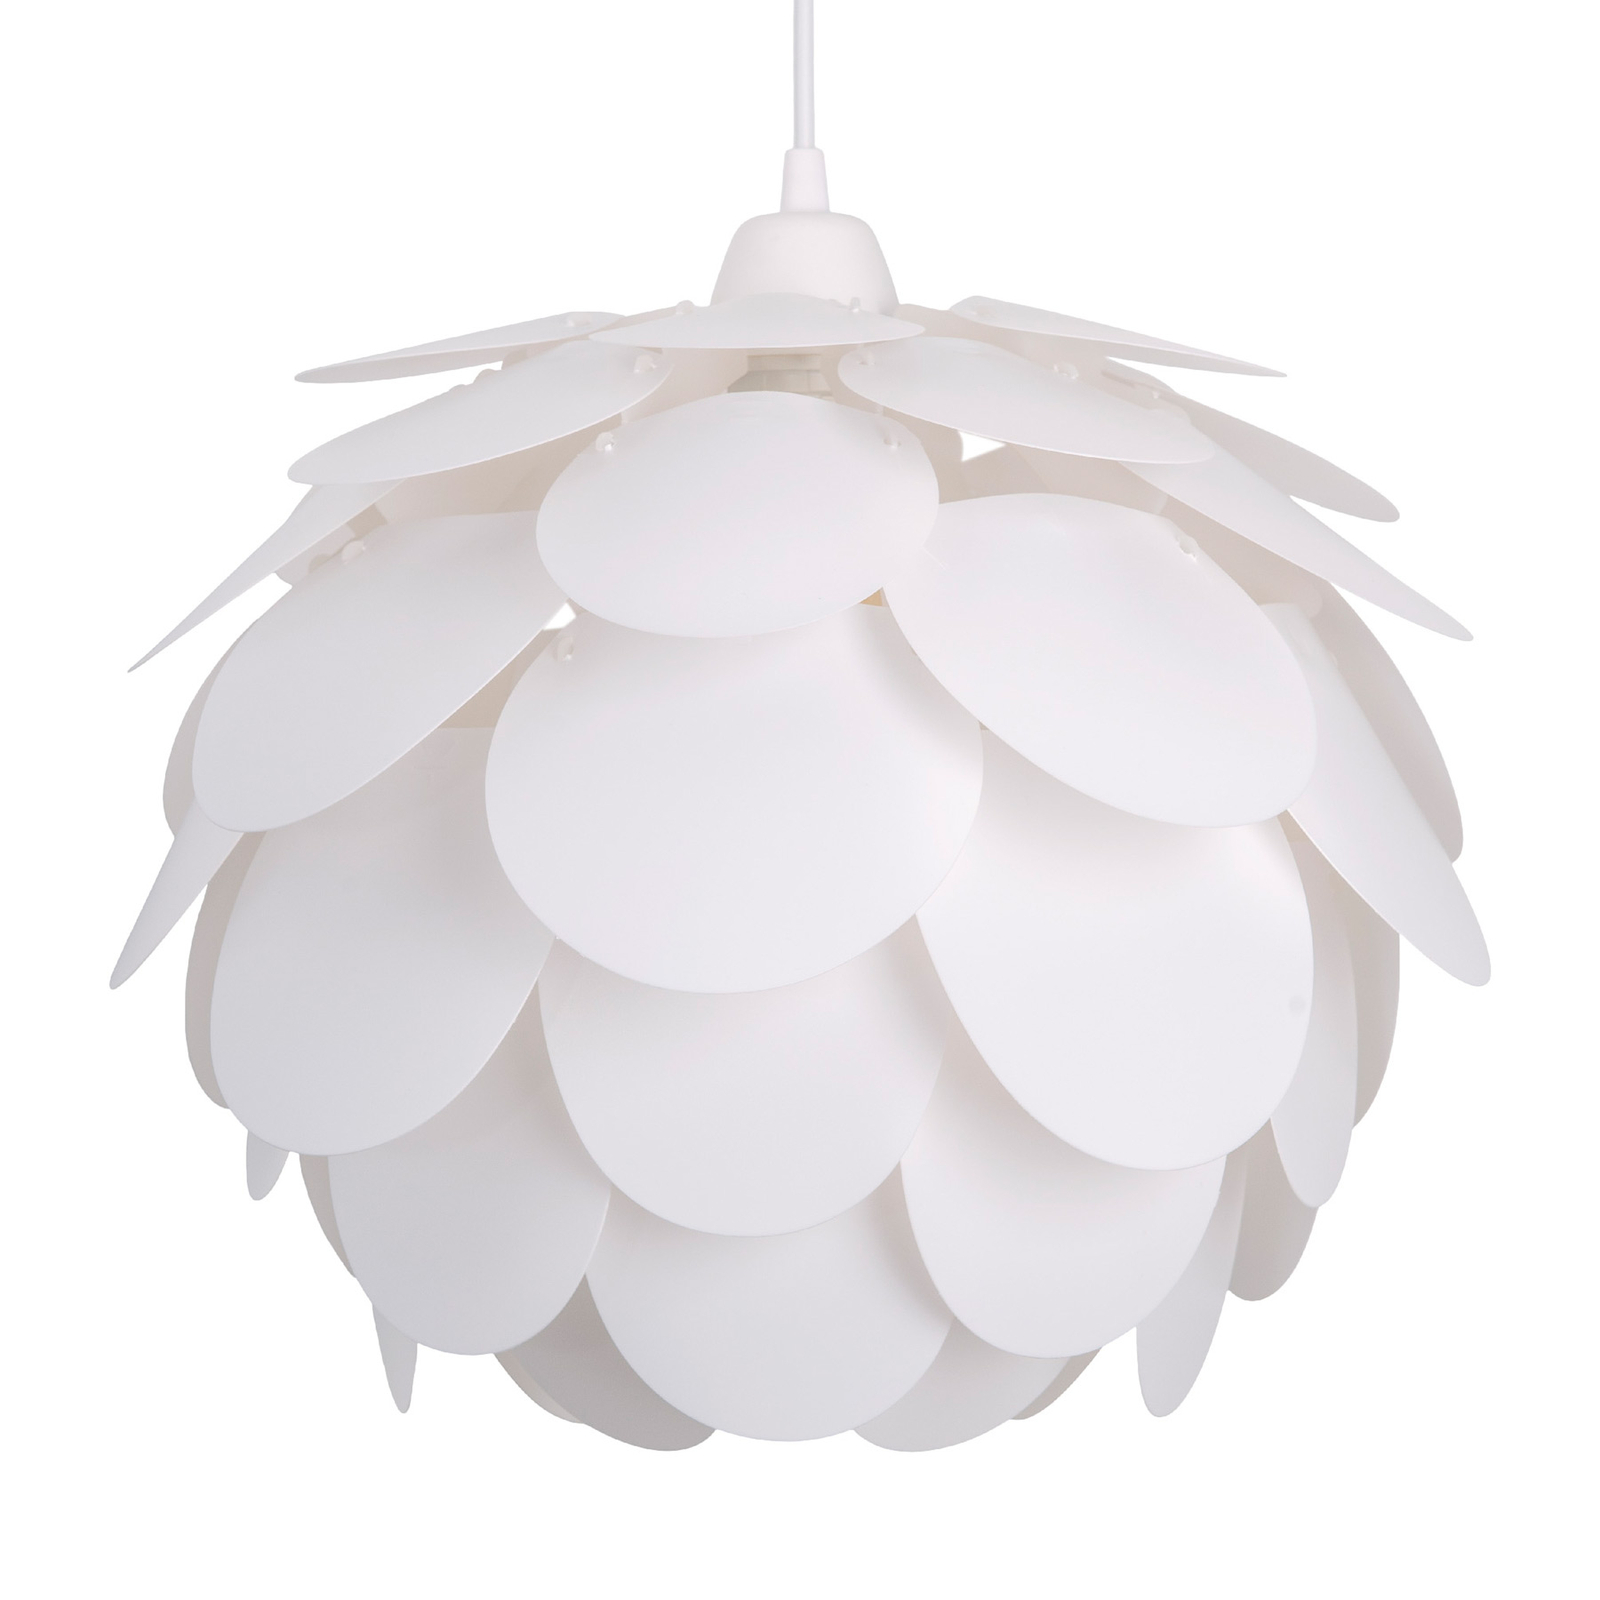 Fora hanging light in a flower shape, white